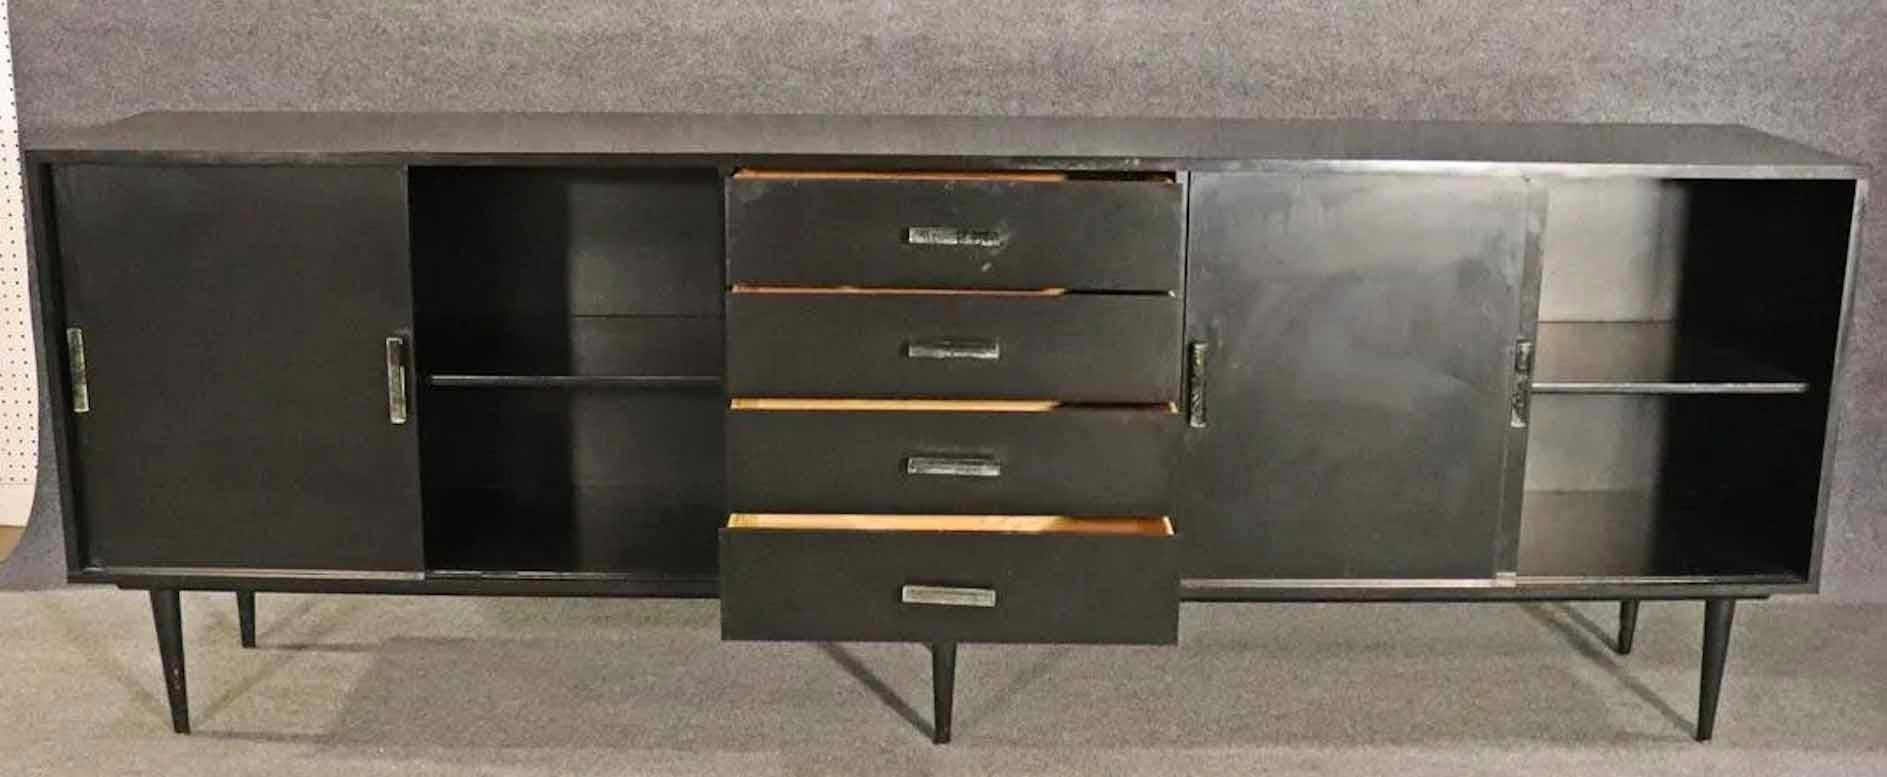 Vintage modern black sideboard with lucite hardware. Cabinet and drawer storage with tapered legs.
Please confirm location.